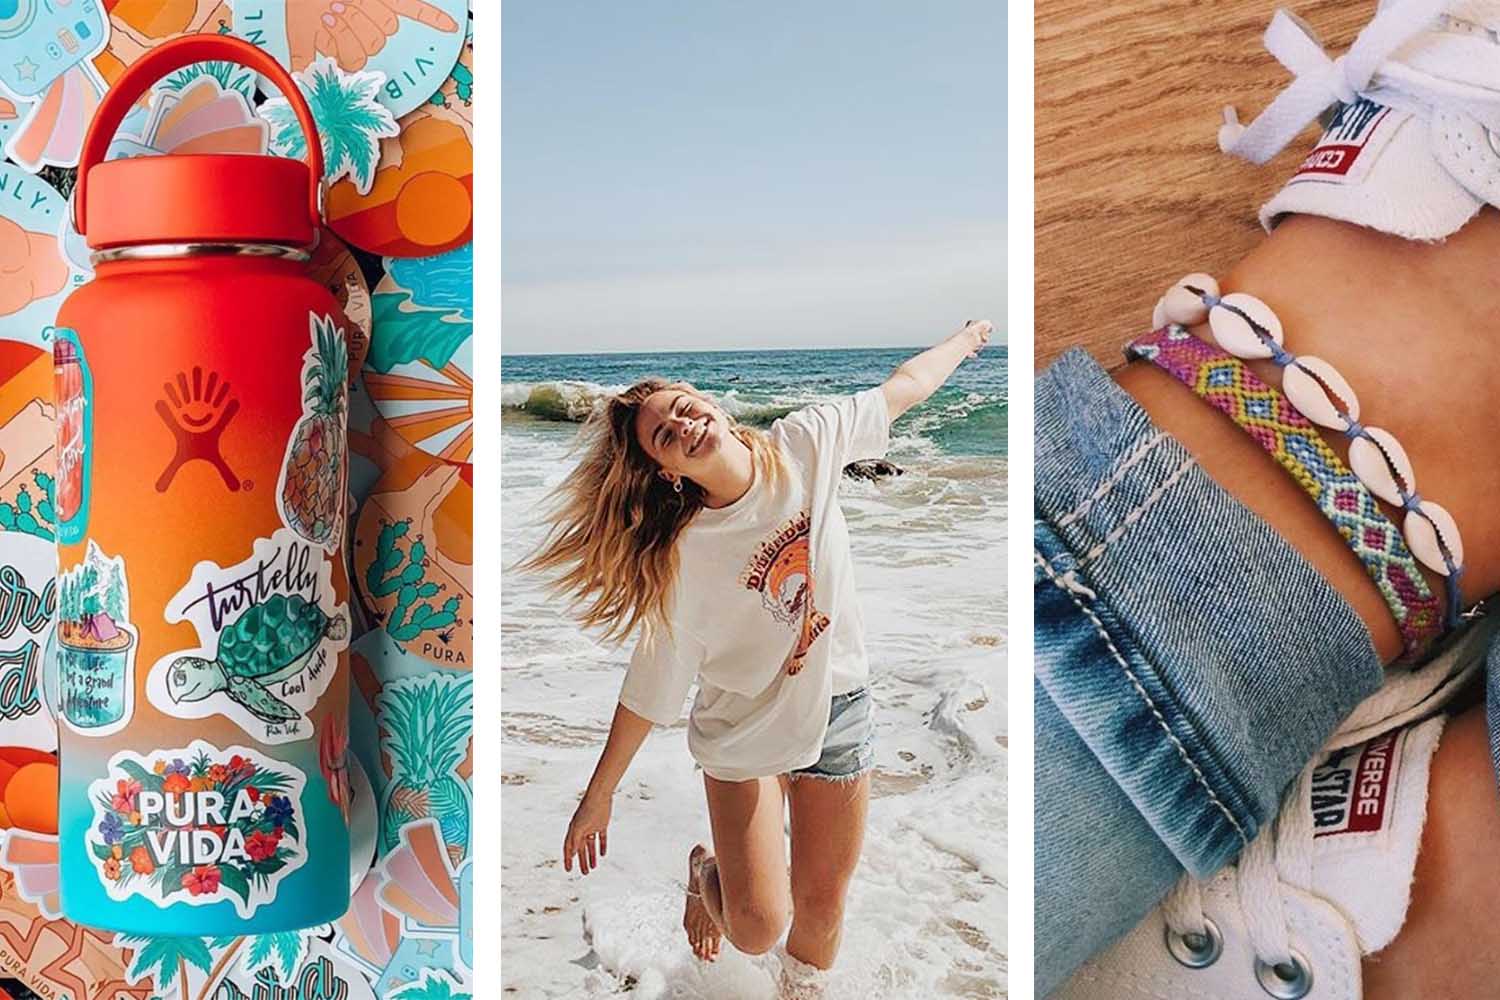 What Is a VSCO Girl? the New Social Media Persona the Internet Hates